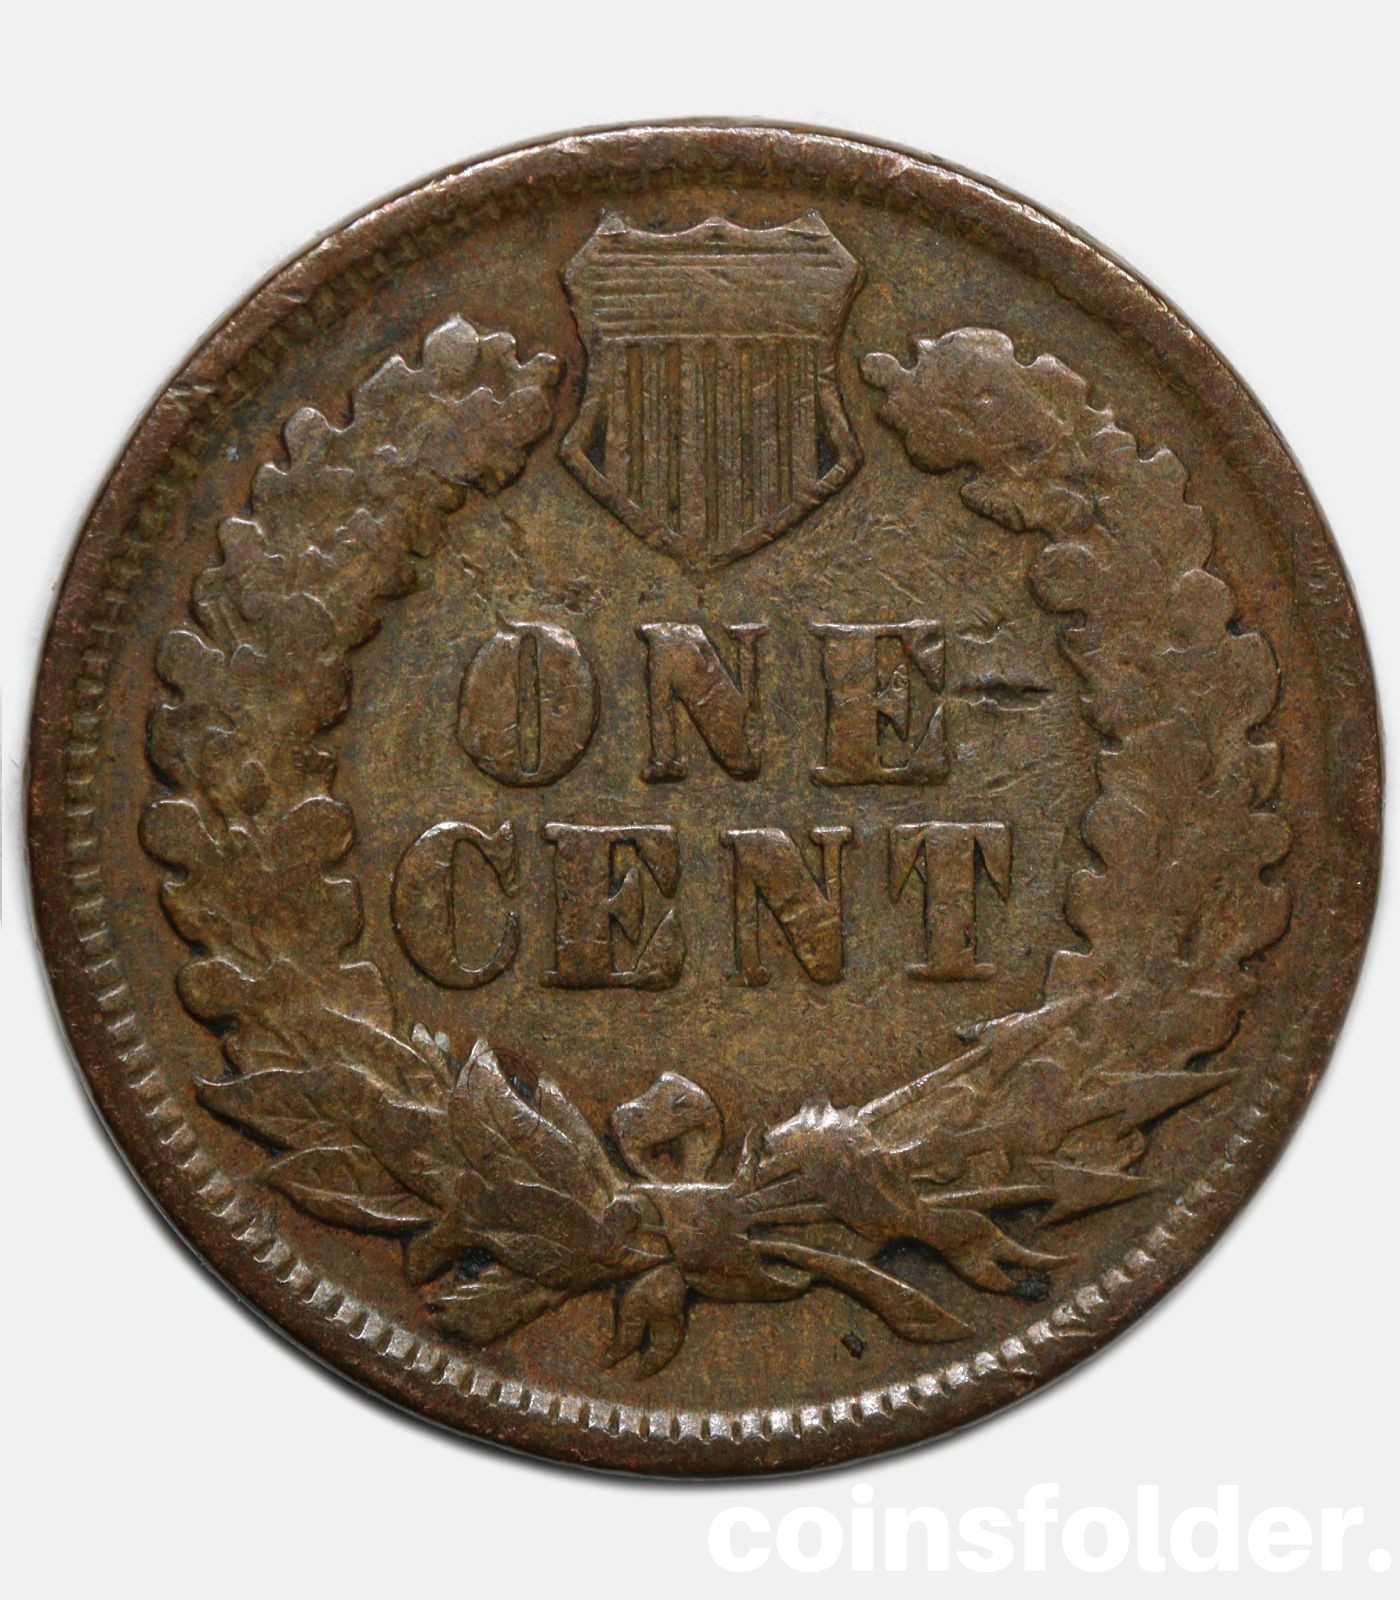 1898 1 Cent "Indian Head Cent"